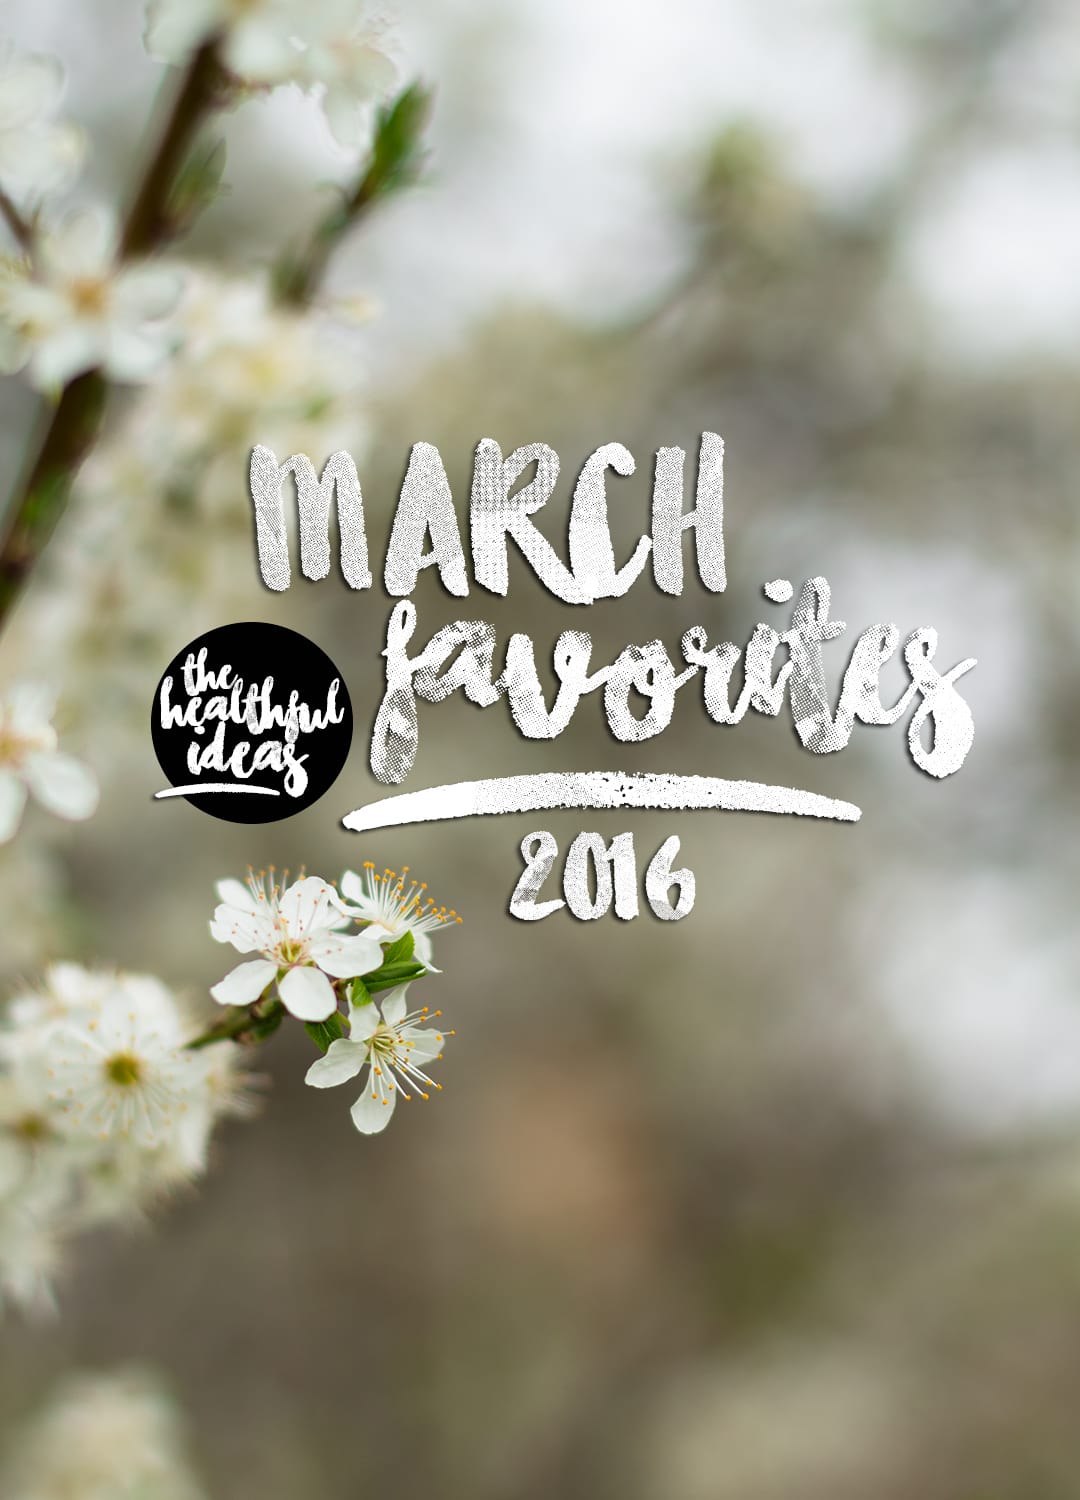 Monthly Favorites March 2016 by The Healthful Ideas | thehealthfulideas.com